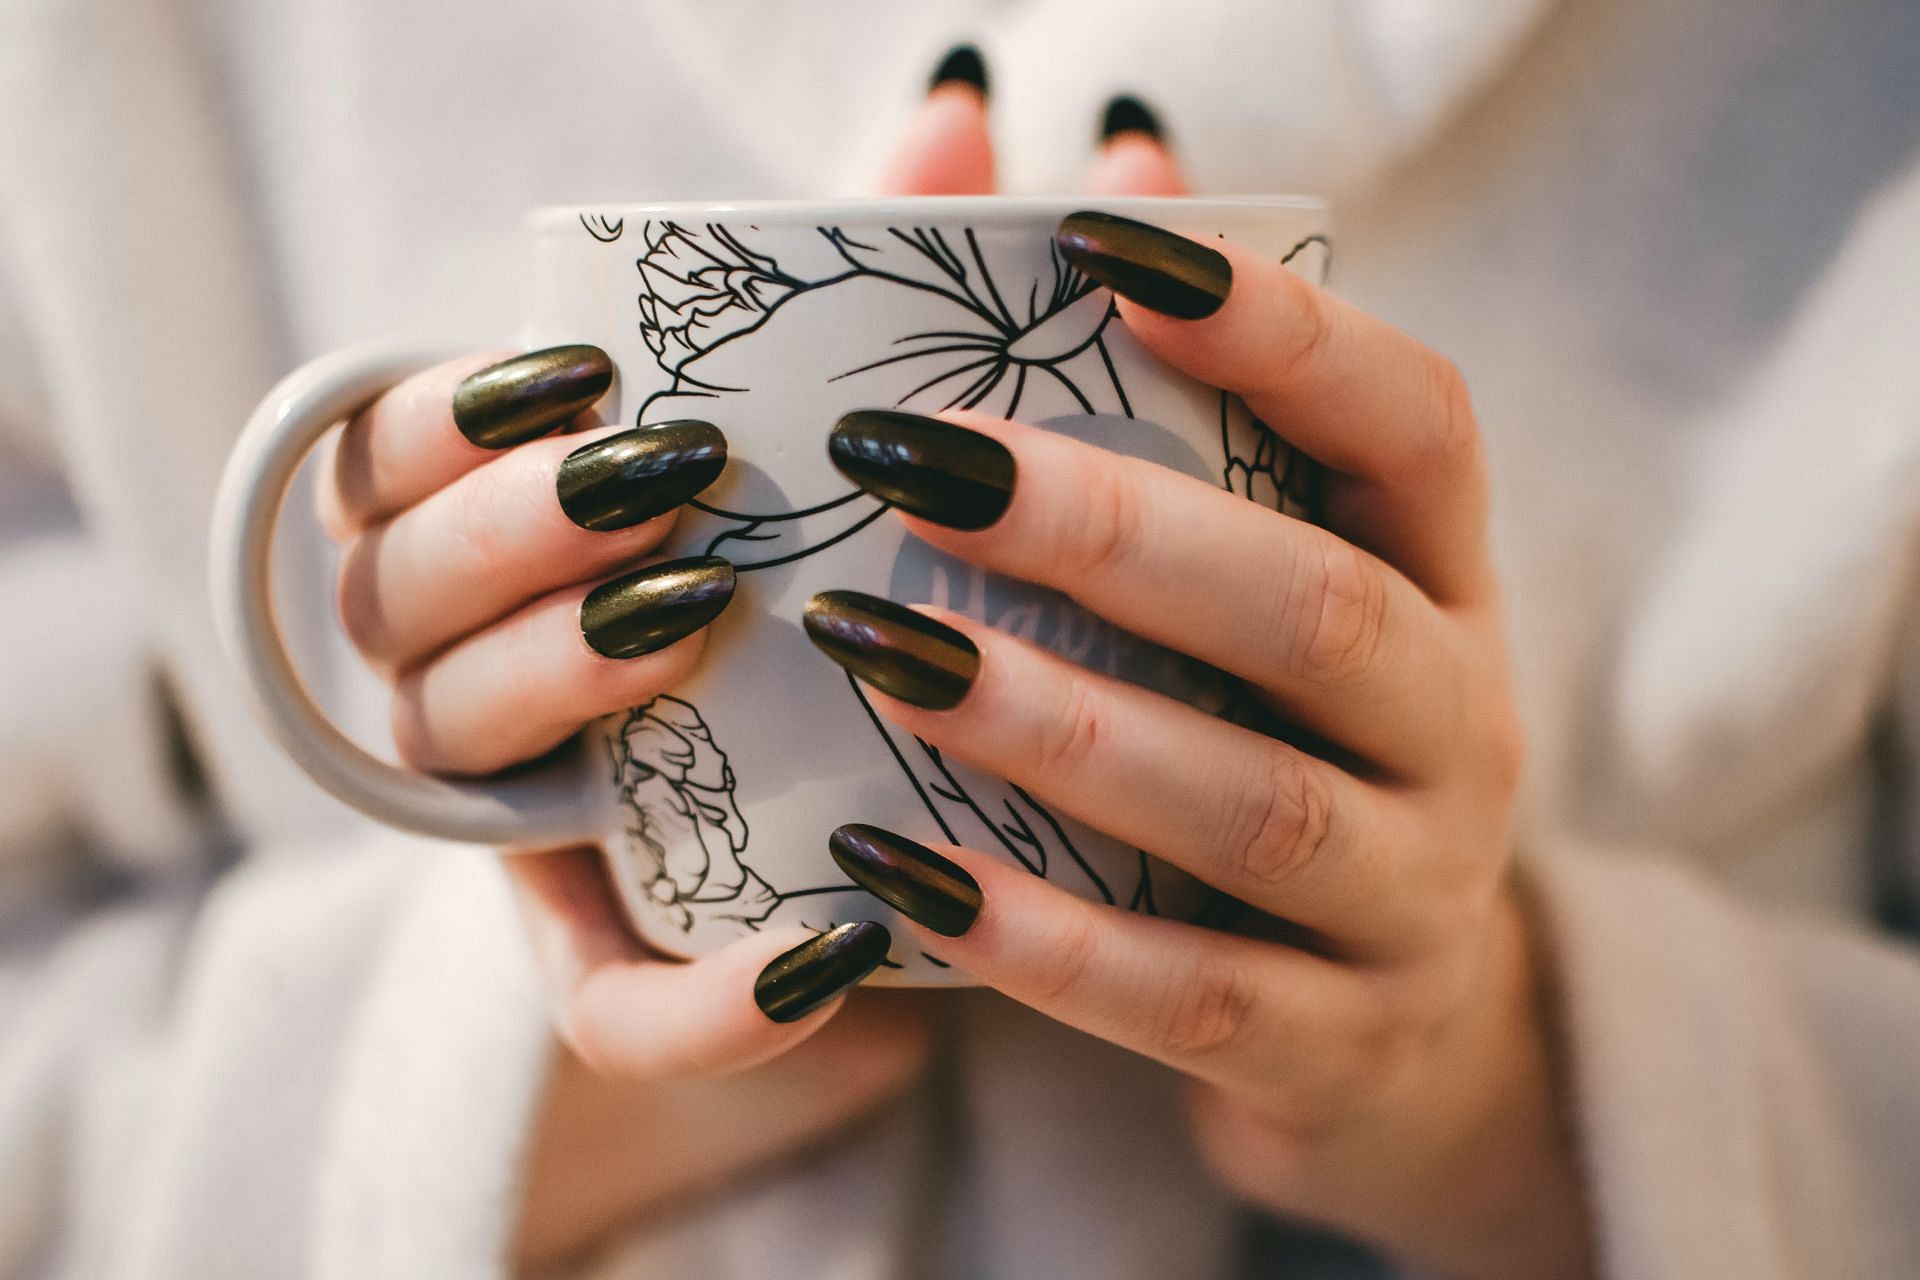 Importance of good nails (image sourced via Pexels / Photo by lisa)